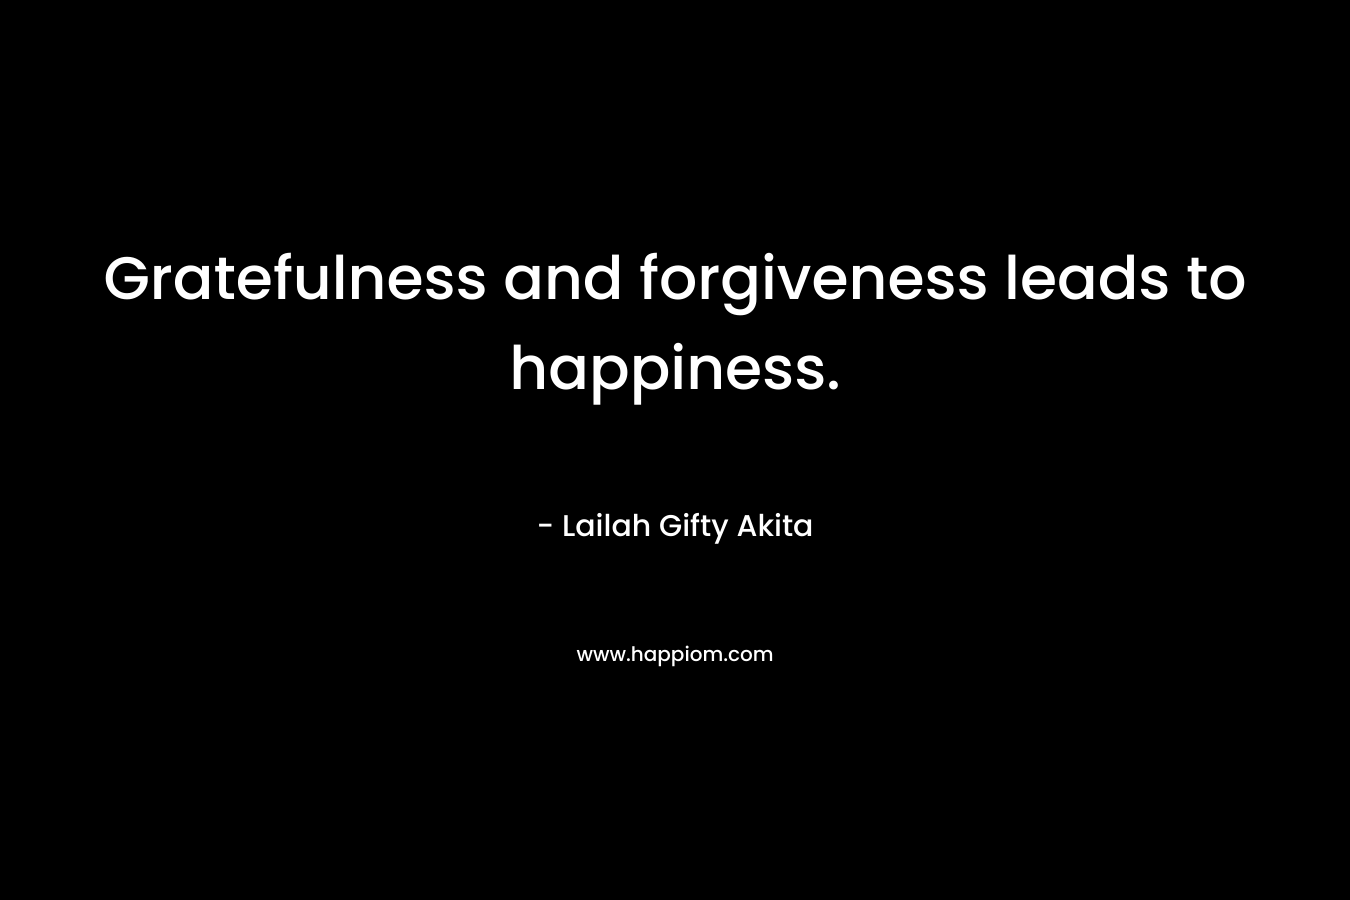 Gratefulness and forgiveness leads to happiness.